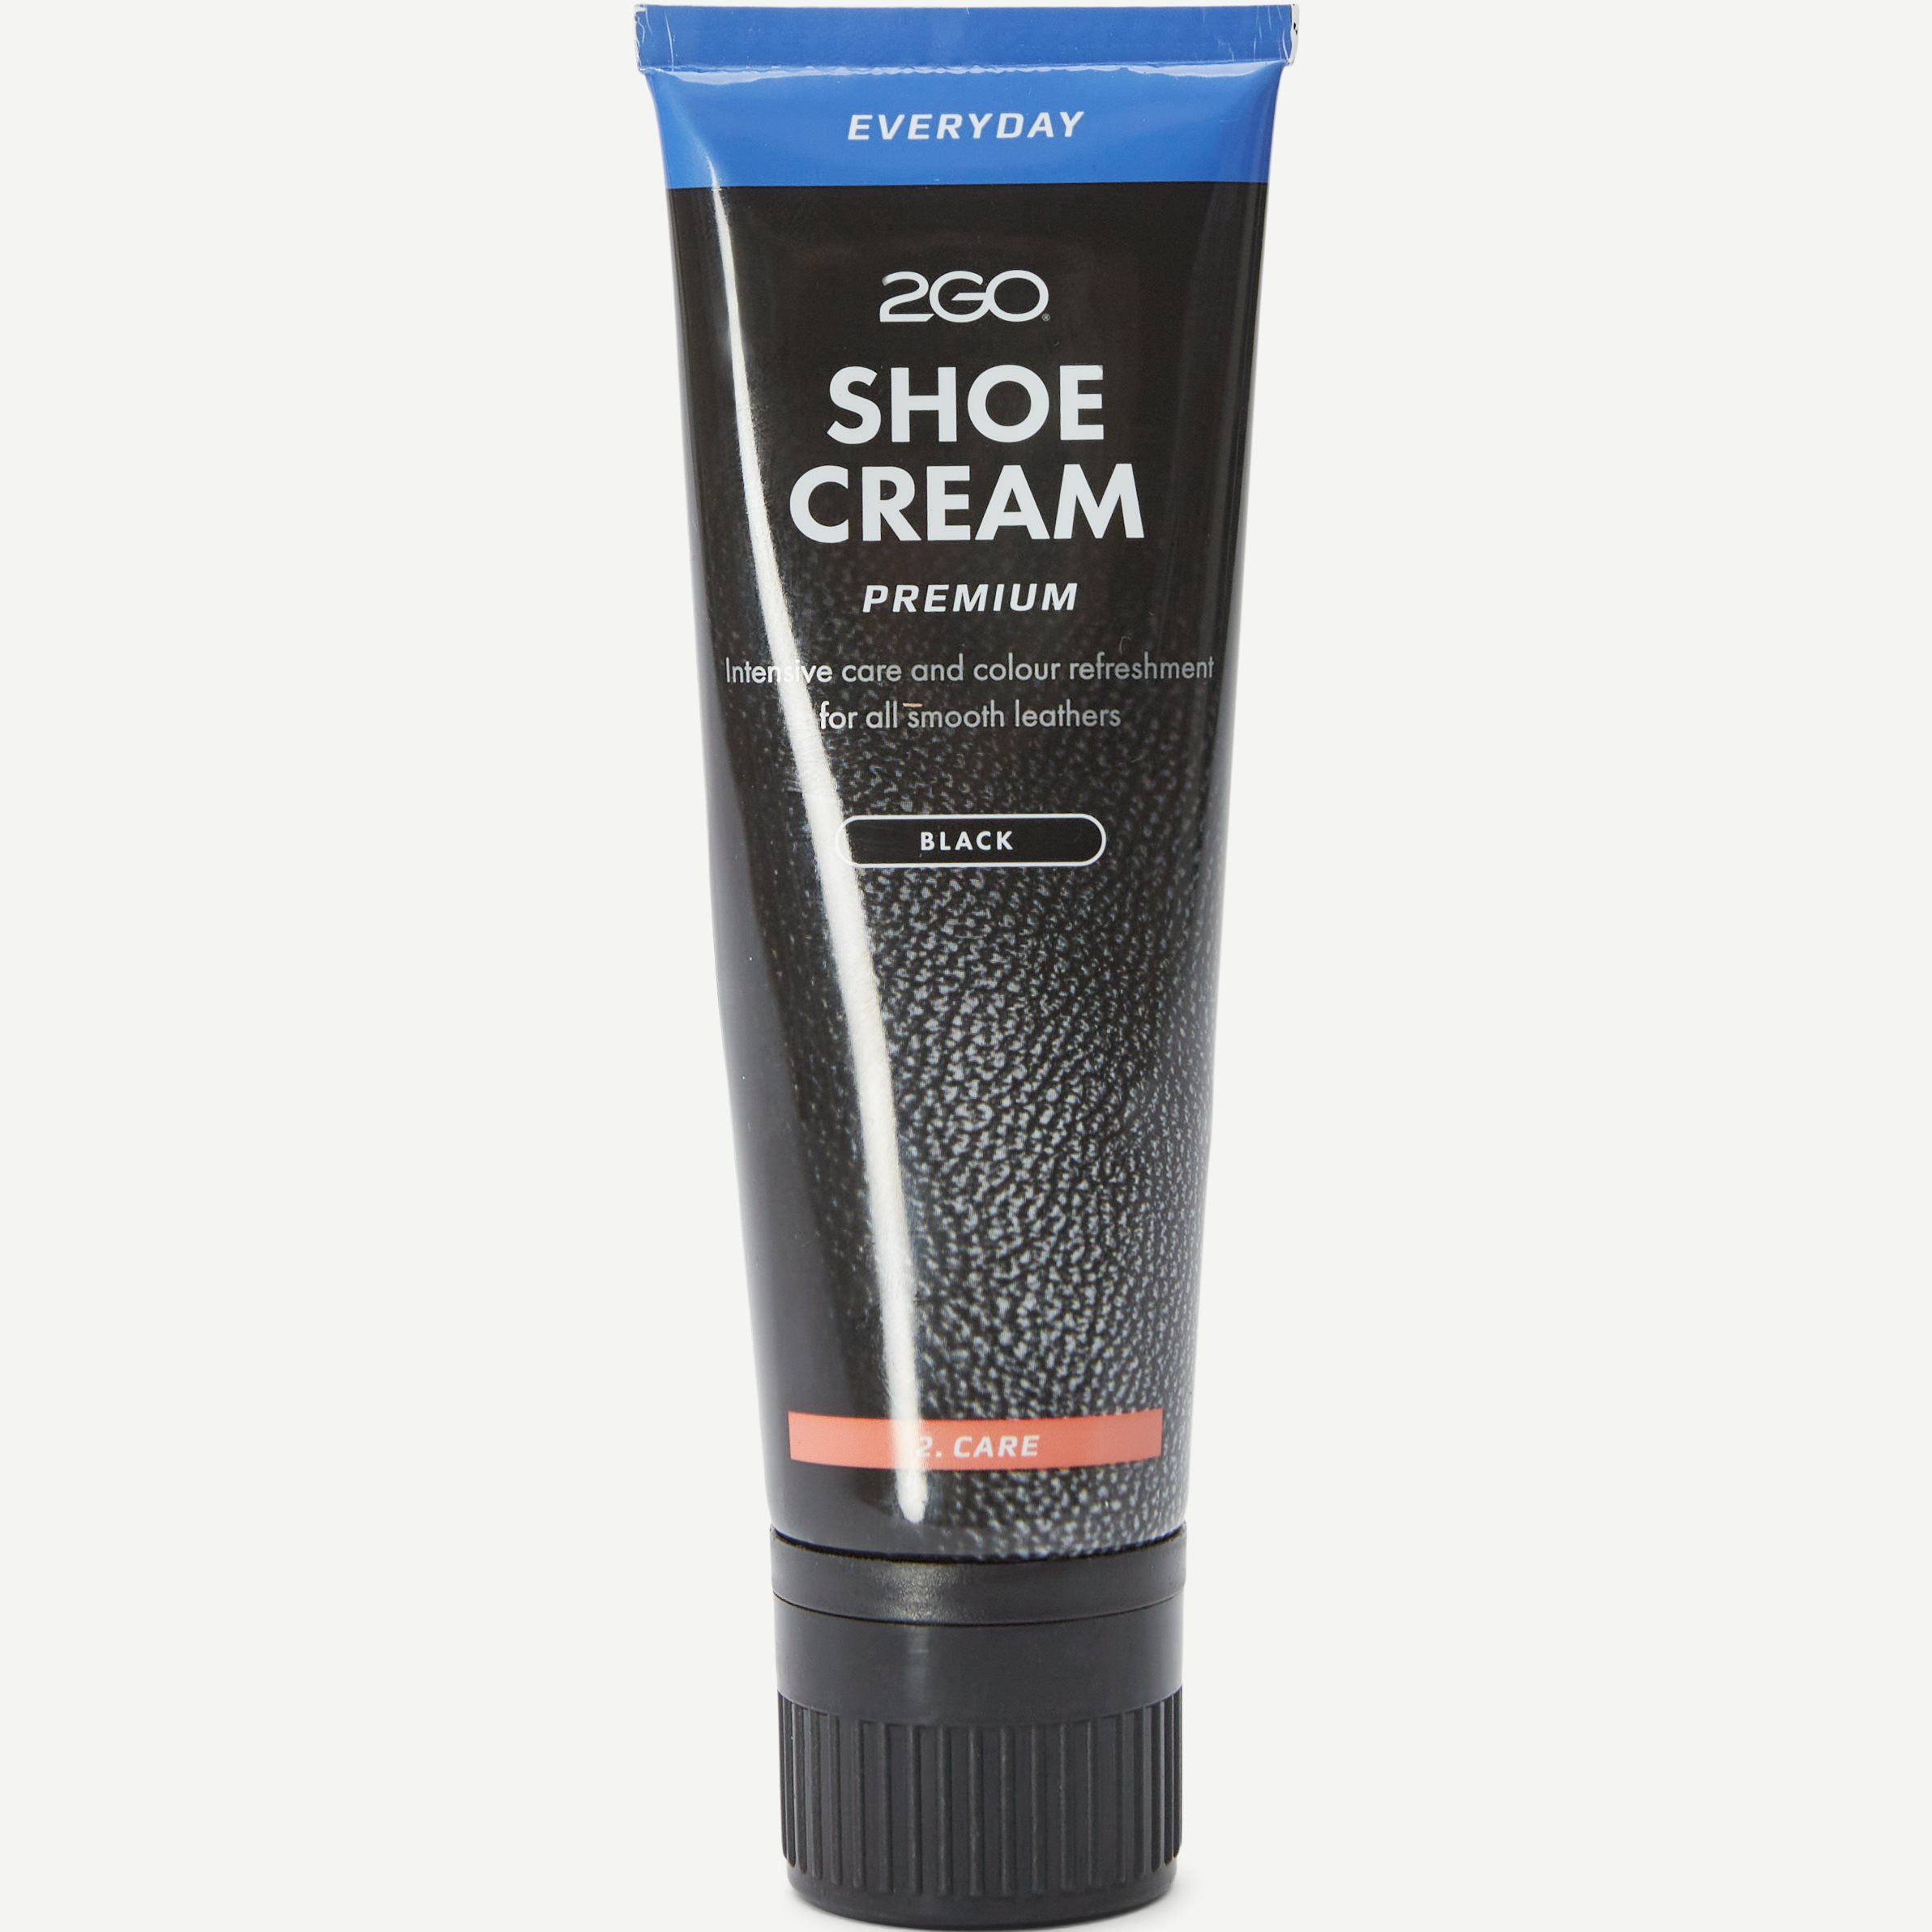 Woly Protector Accessories 2GO SHOE CREAM Black